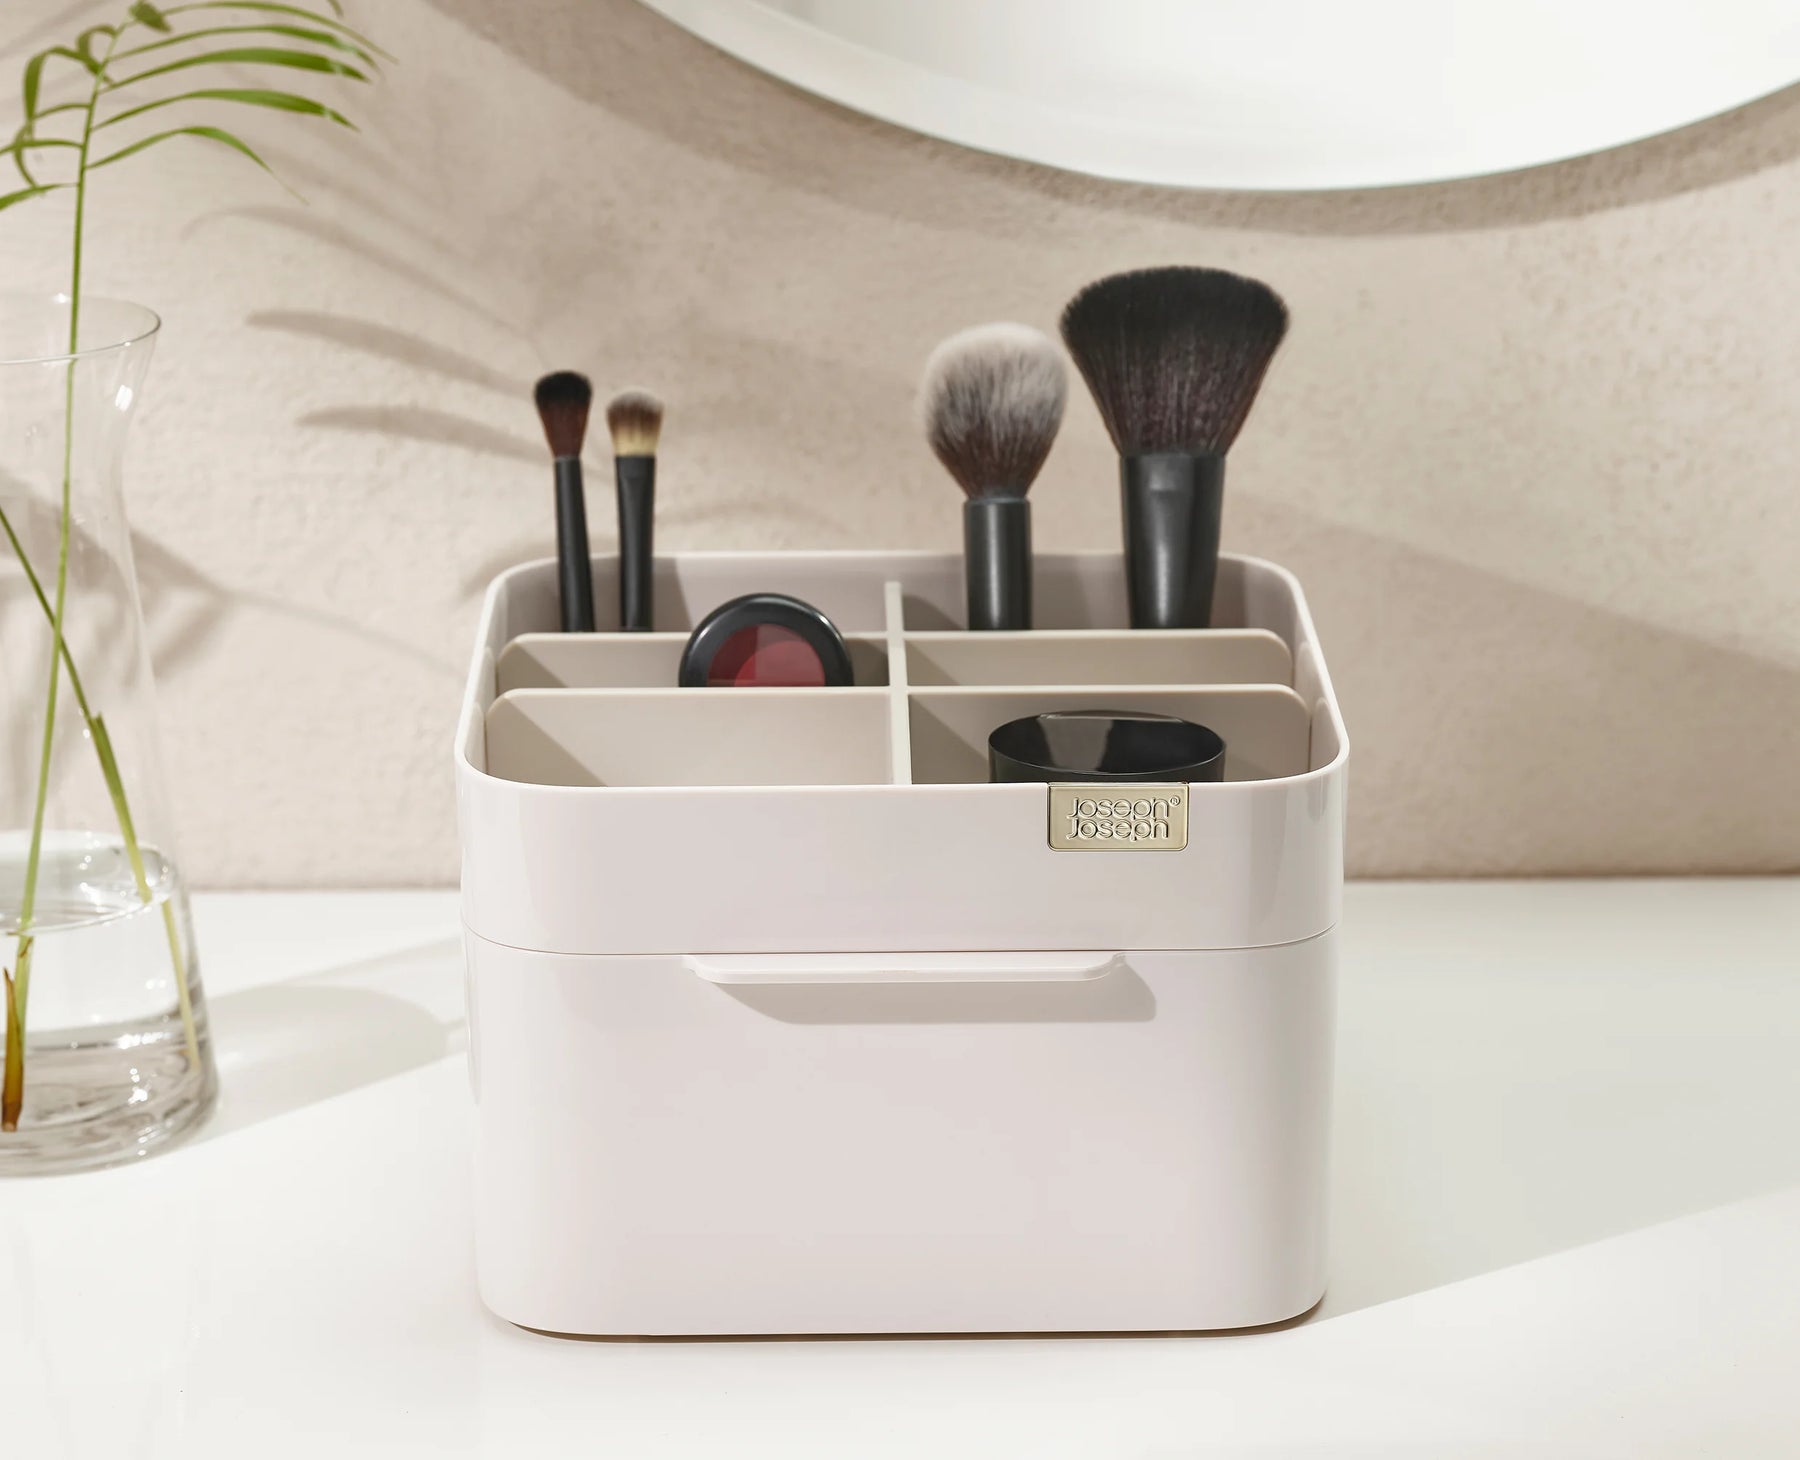 1PCS/Magnetic attraction Portable Silicone Makeup Brush Holder - Soft And  Stylish Travel Organizer For Makeup Tools